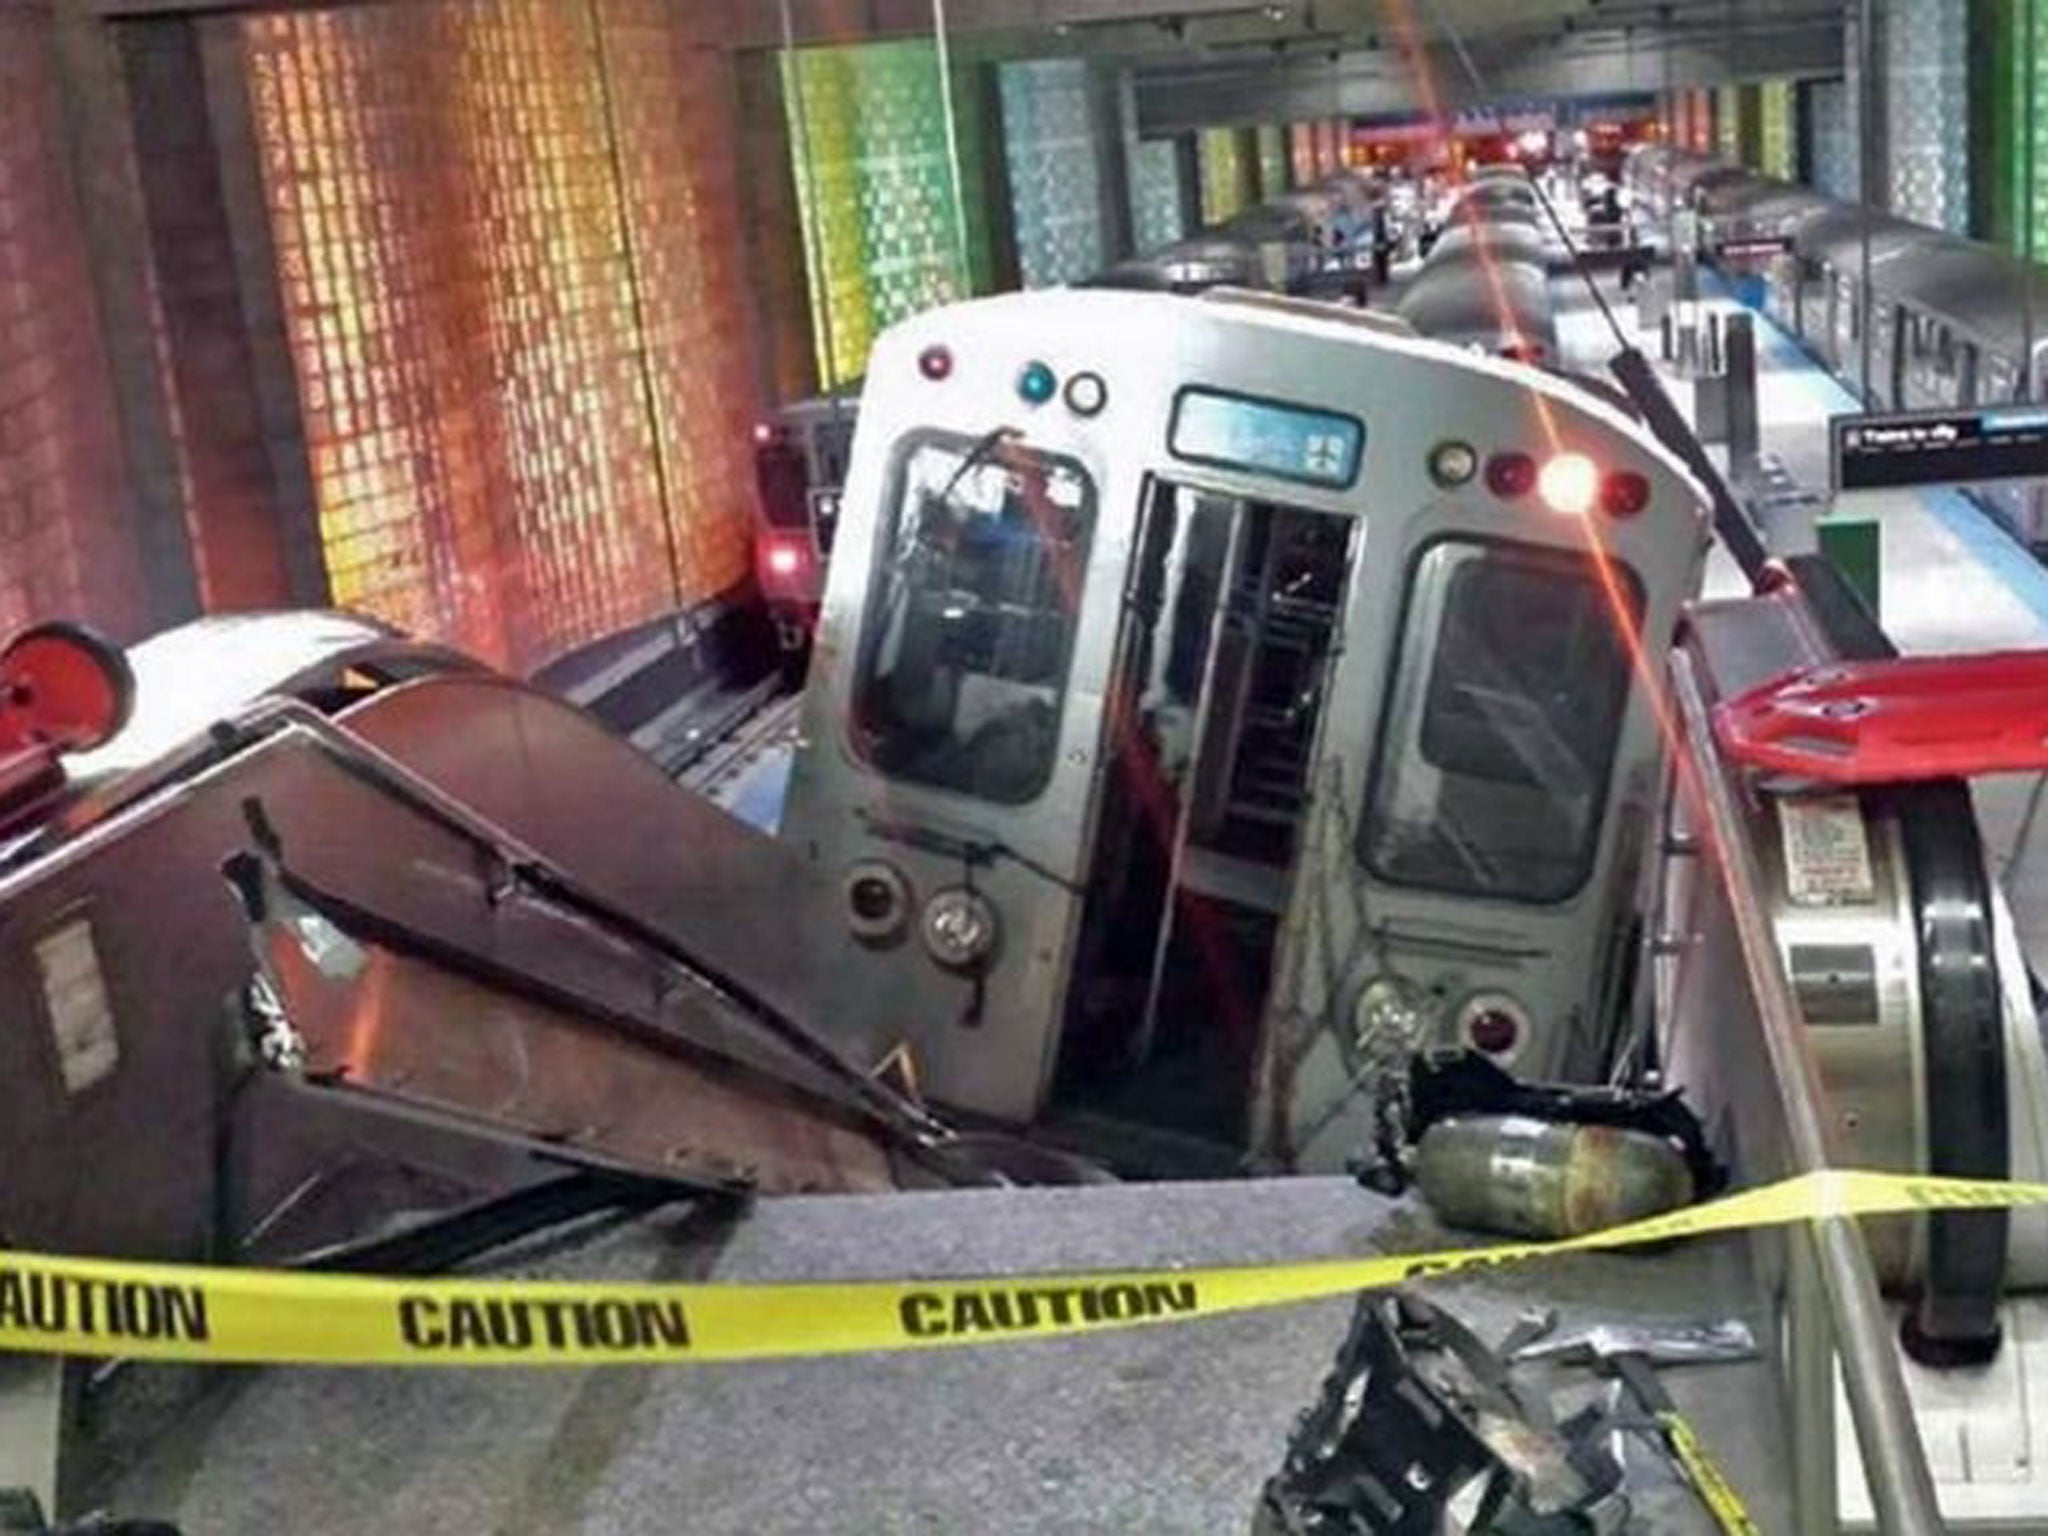 A Chicago Transit Authority train car rests on an escalator at the O'Hare Airport station after it derailed.